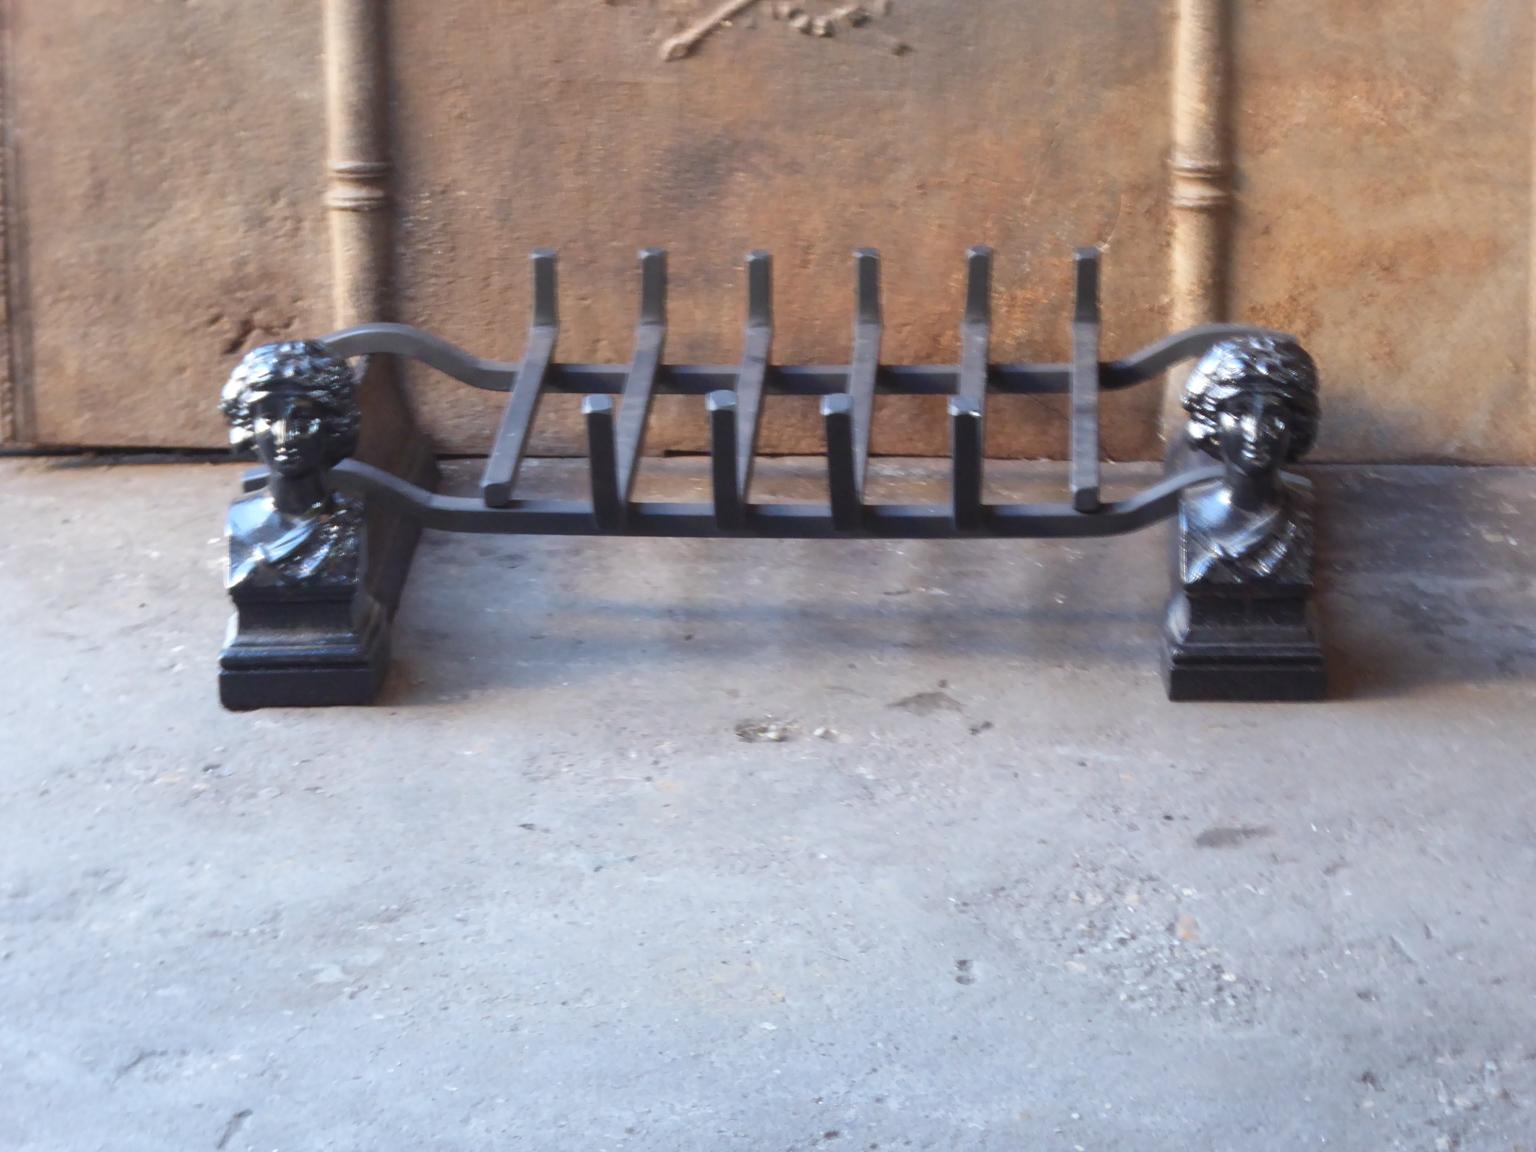 Late 19th or early 20th century French Napoleon III fireplace basket, fire basket made of wrought iron and cast iron. The basket is in a good condition and is fully functional.